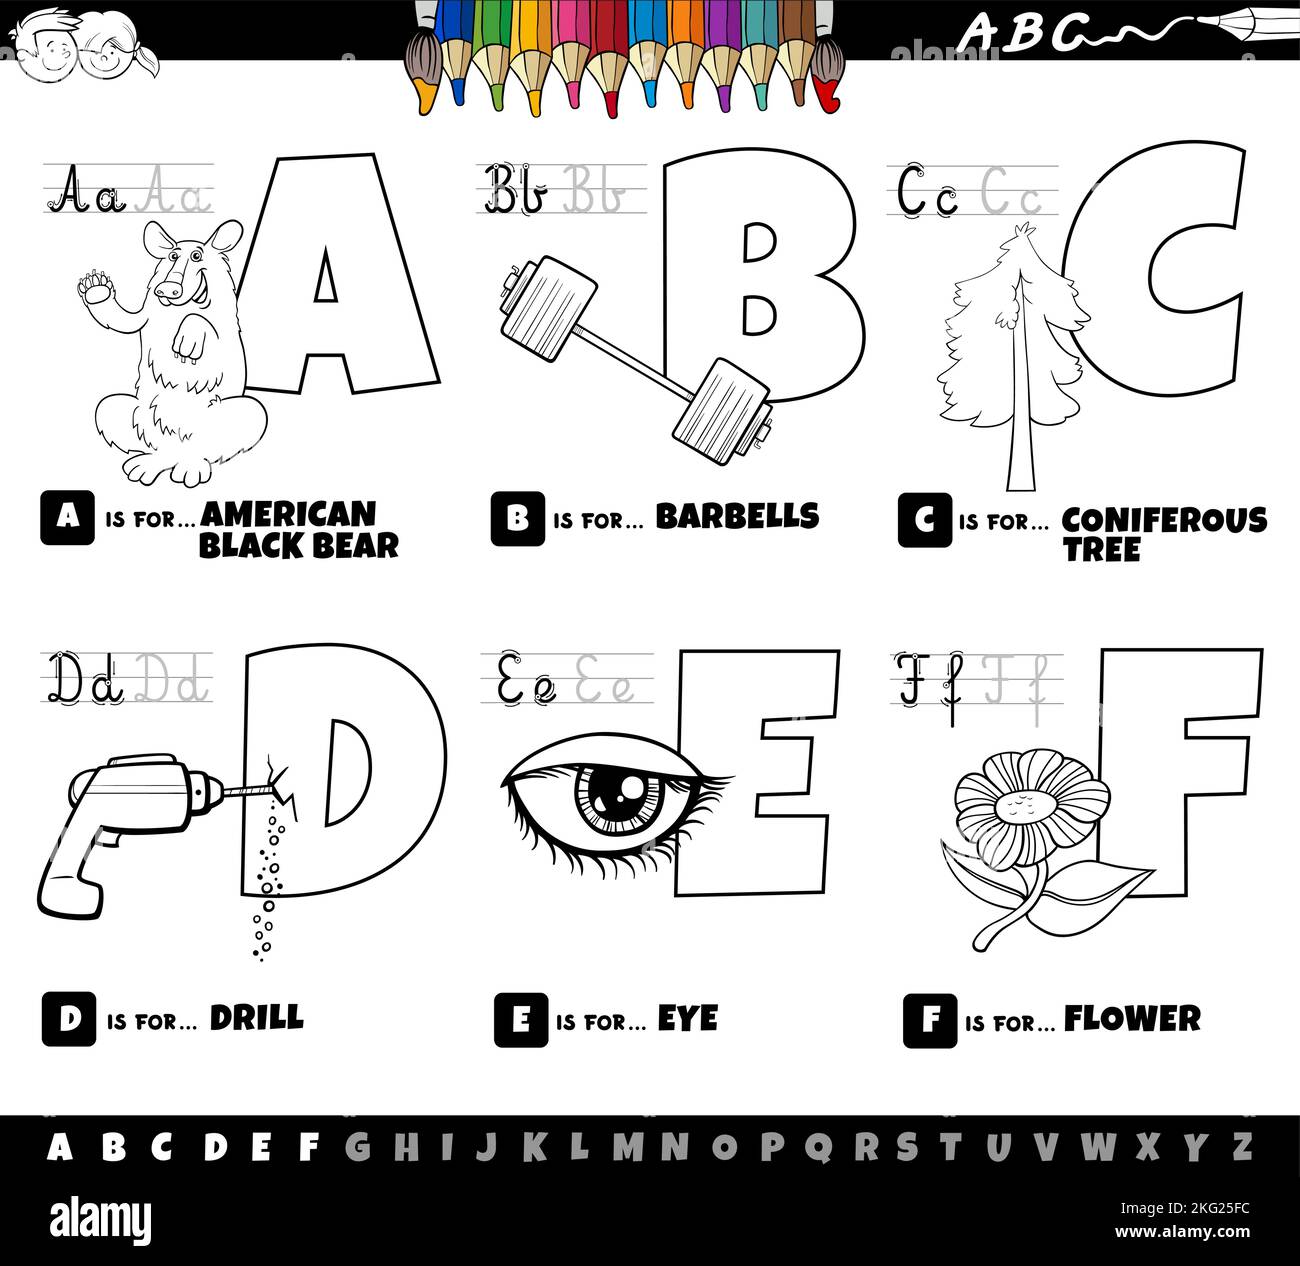 Black and white cartoon illustration of capital letters from alphabet educational set for reading and writing practice for children from A to F colori Stock Vector